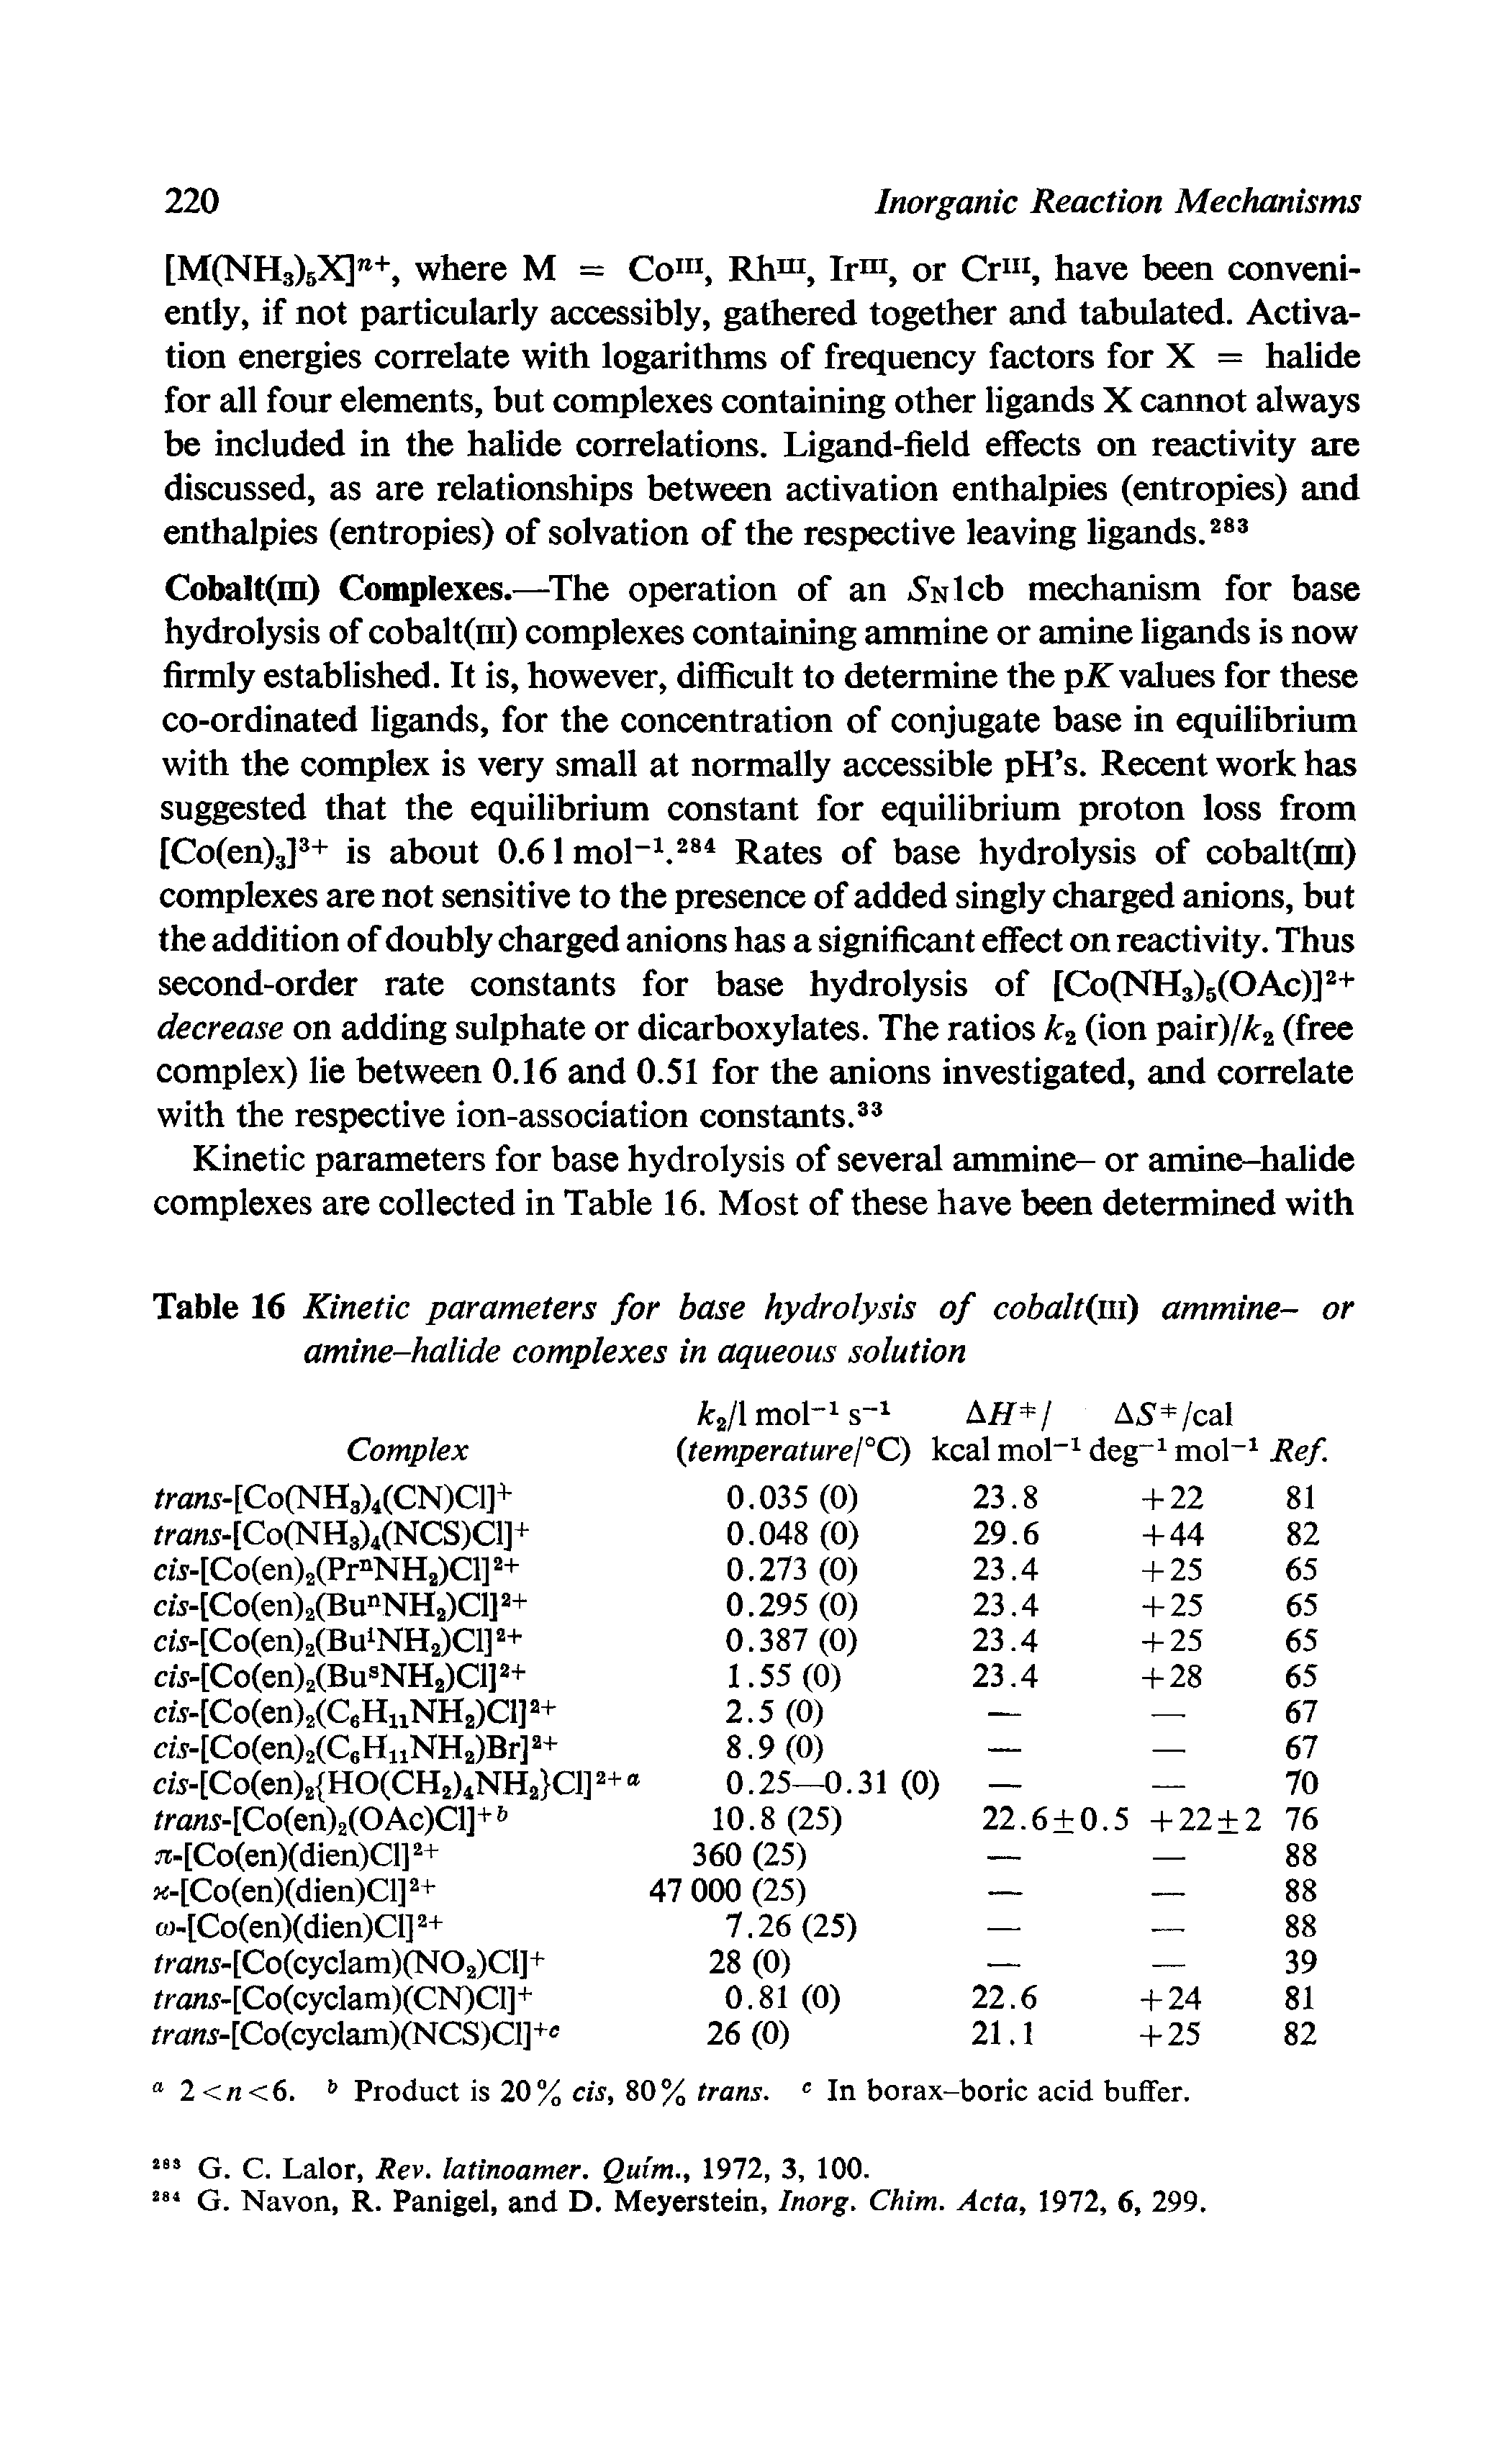 Table 16 Kinetic parameters for base hydrolysis of cobaltija) ammine- or amine-halide complexes in aqueous solution...